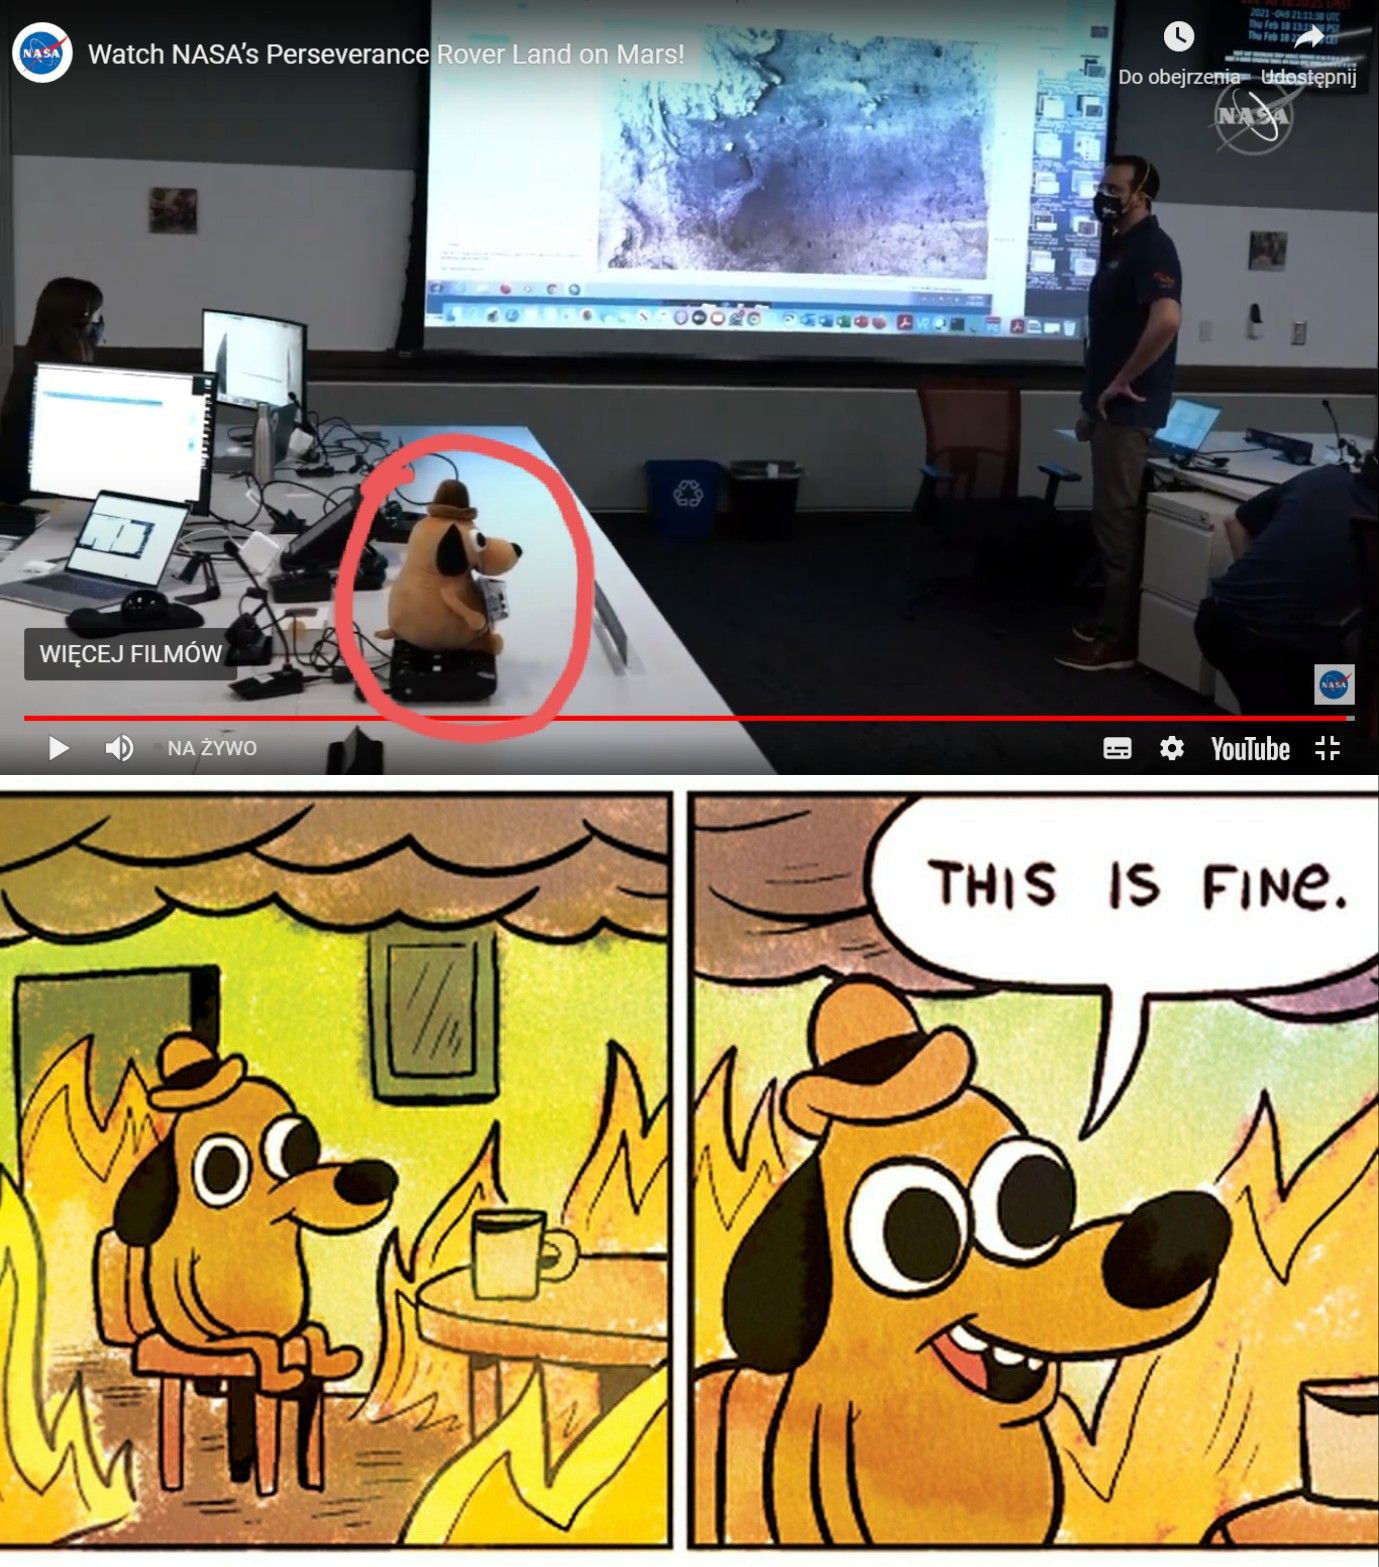 While watching NASA's stream of Perseverance landing on Mars, I've noticed this in their office of ground ops control.